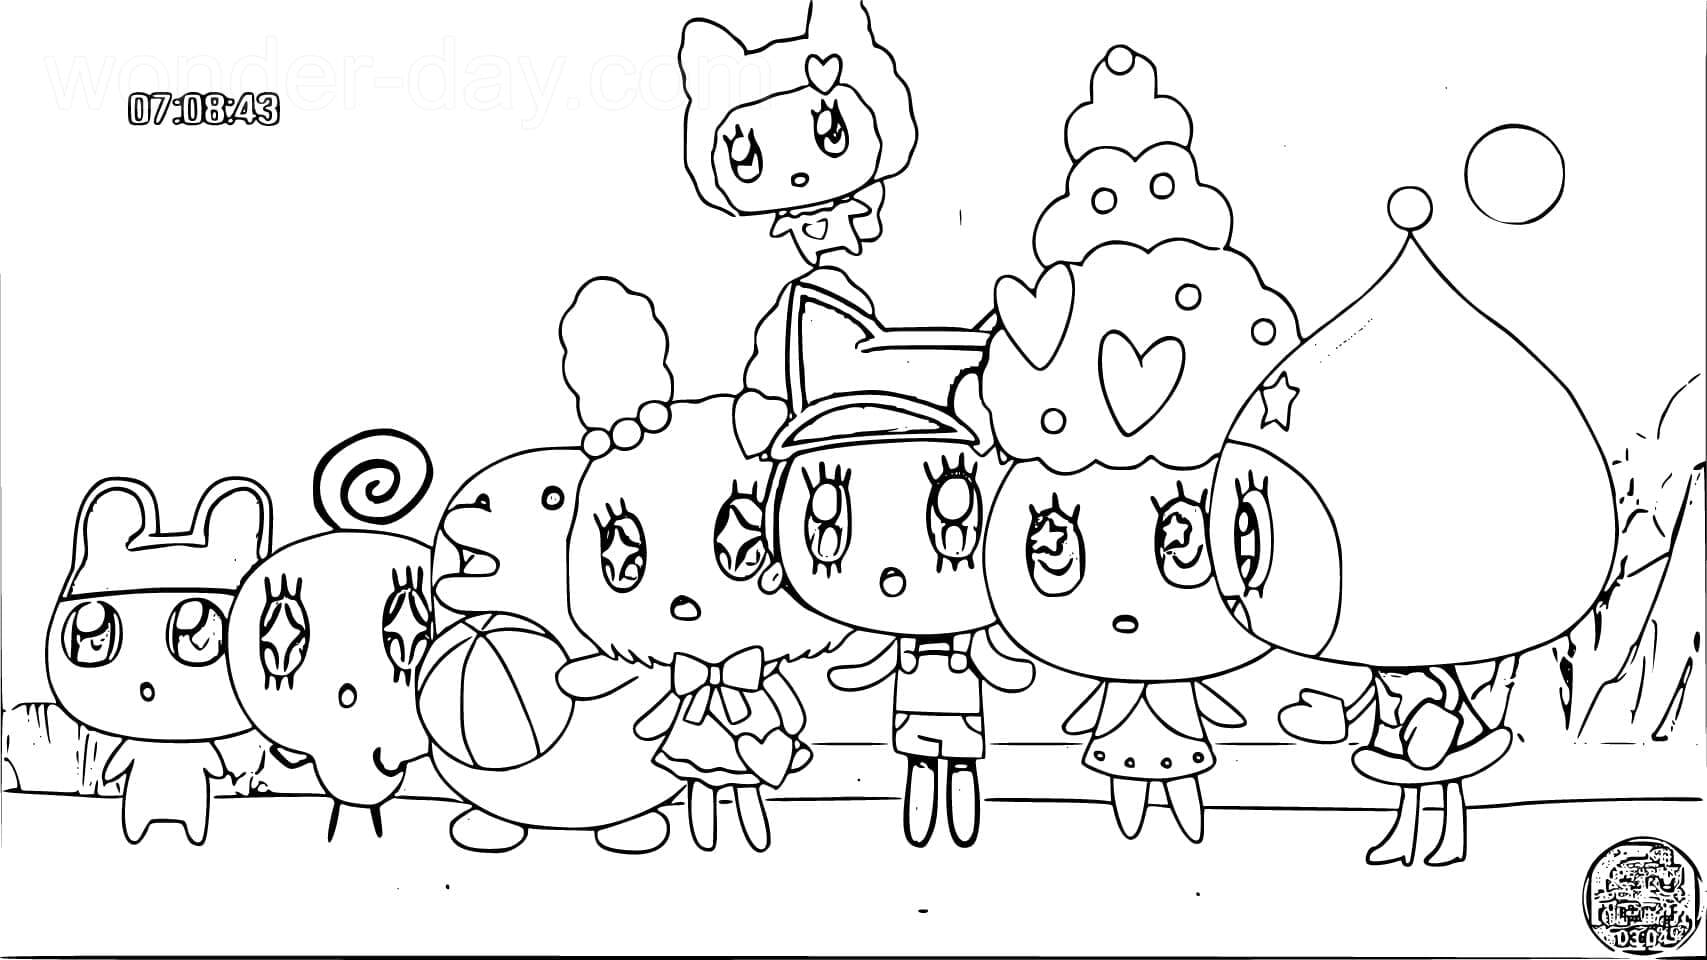 Tamagochi coloring pages